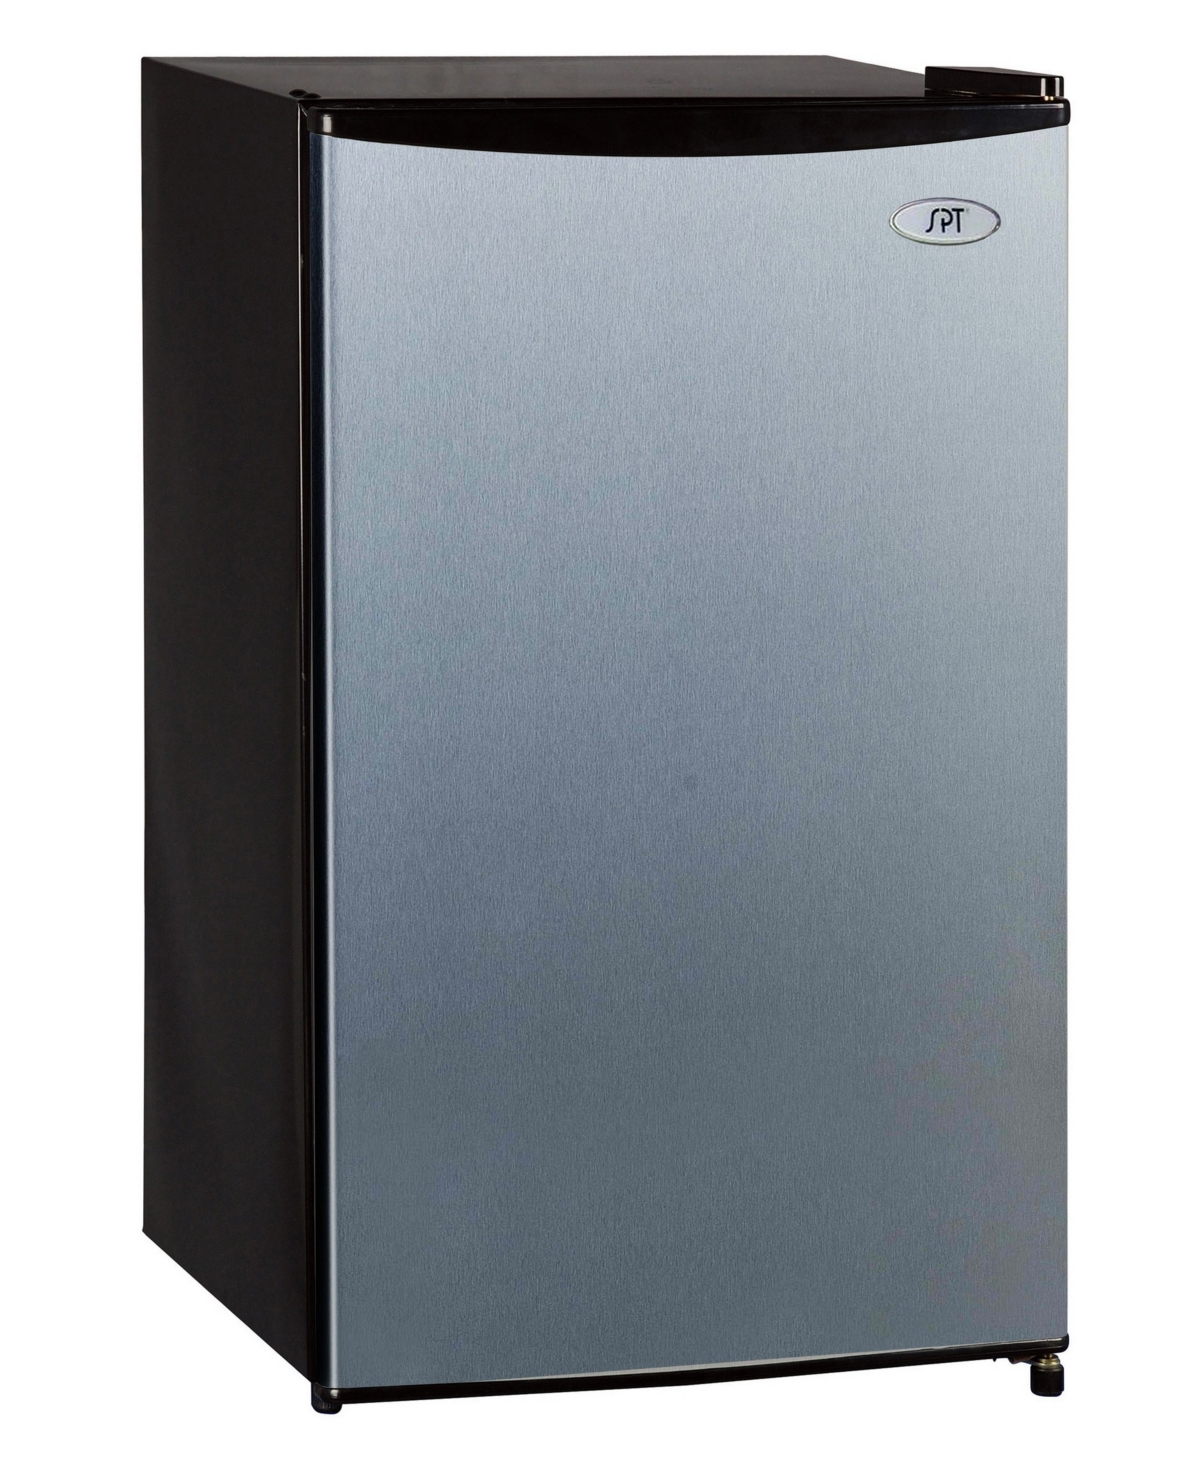 Spt 3.3 Cubic feet Compact Refrigerator with Energy Star - Stainless